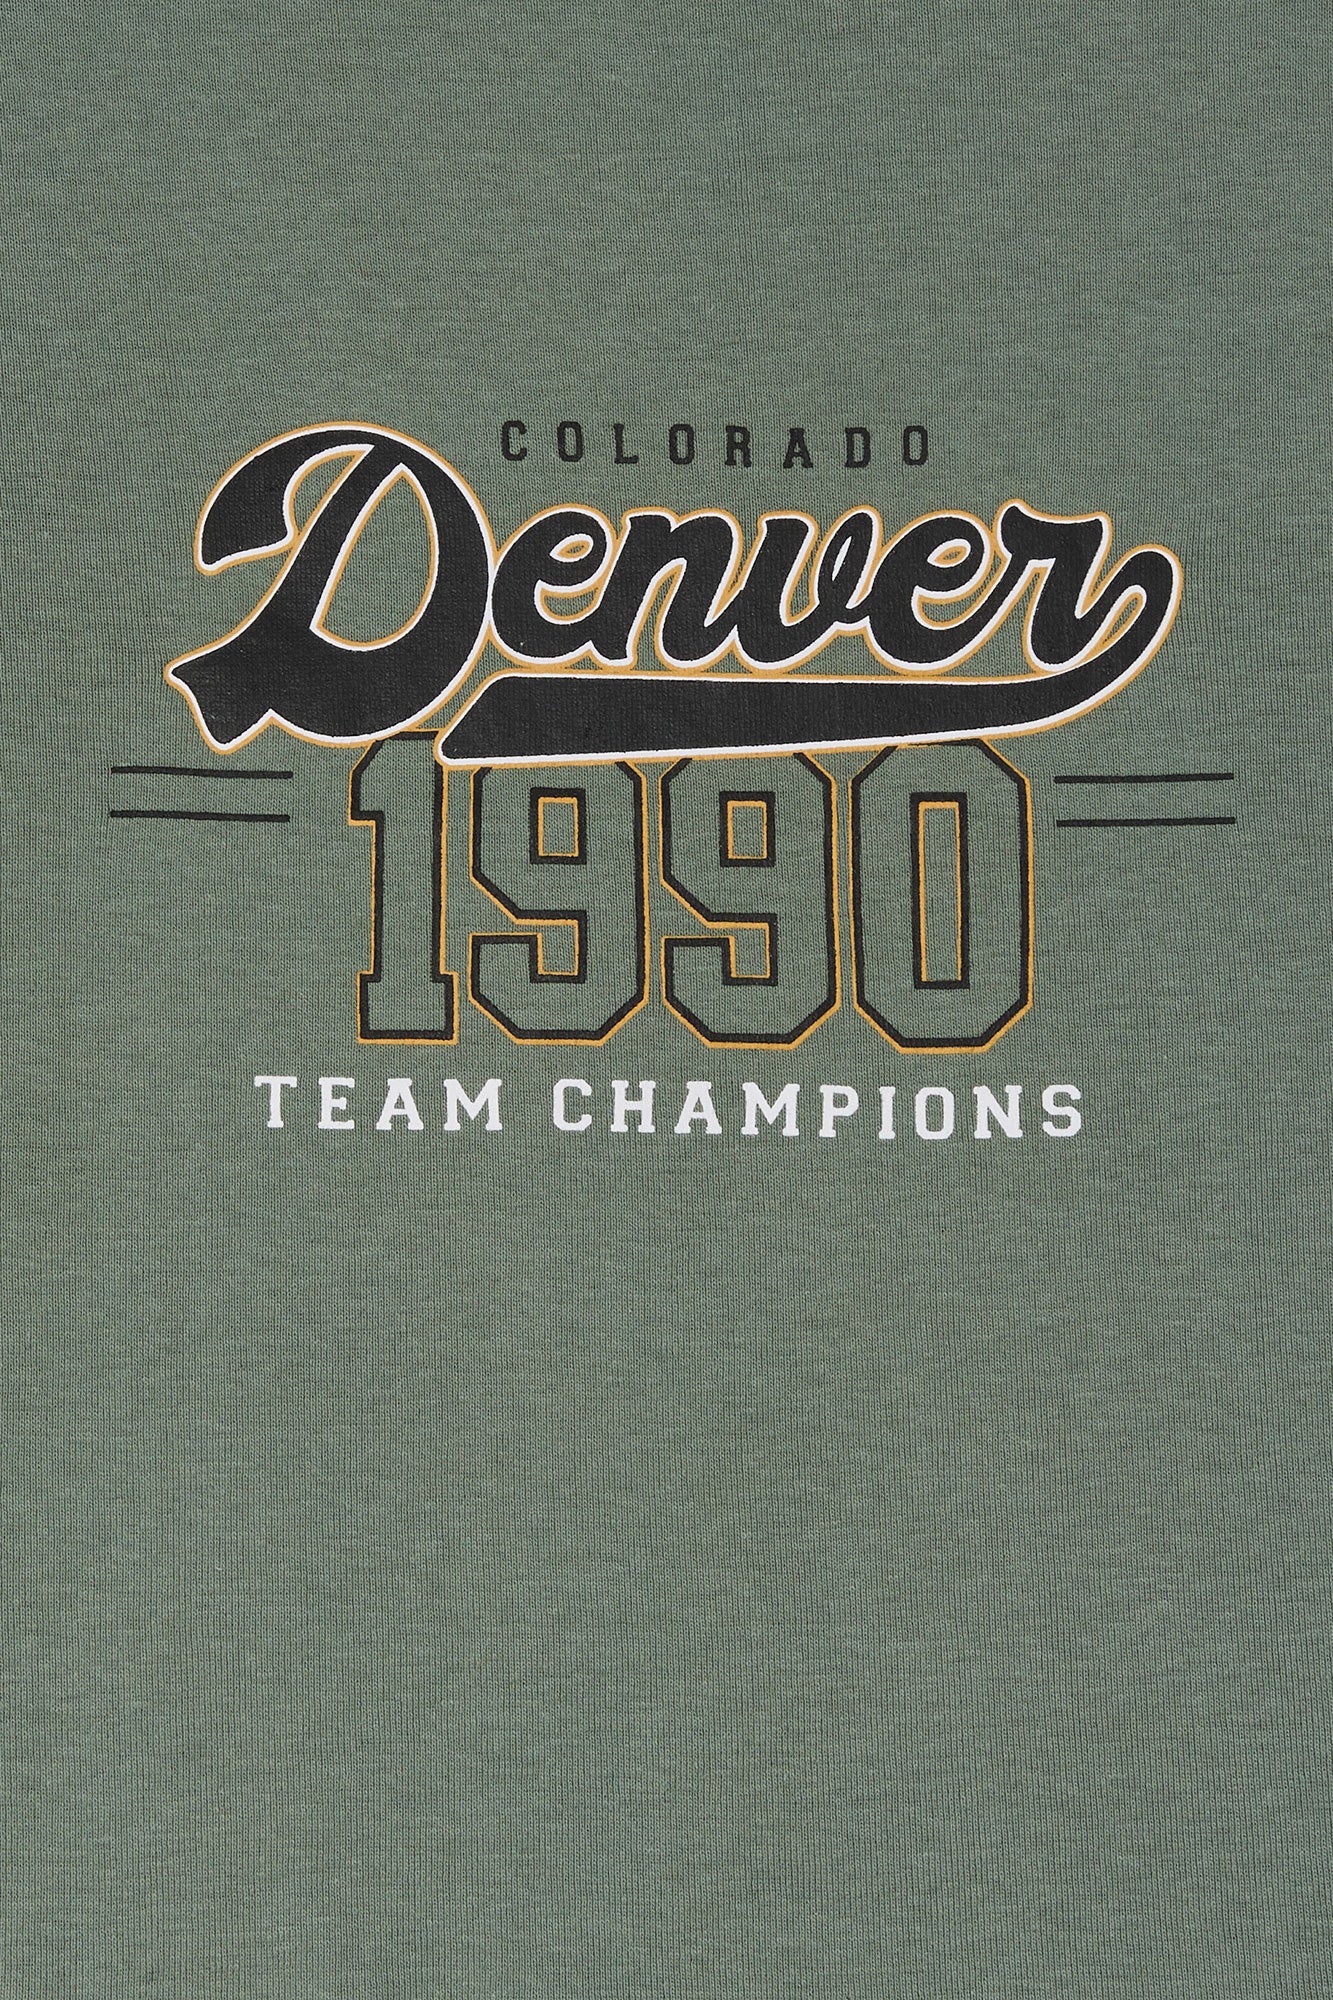 Denver 1990 Graphic Baby T-Shirt